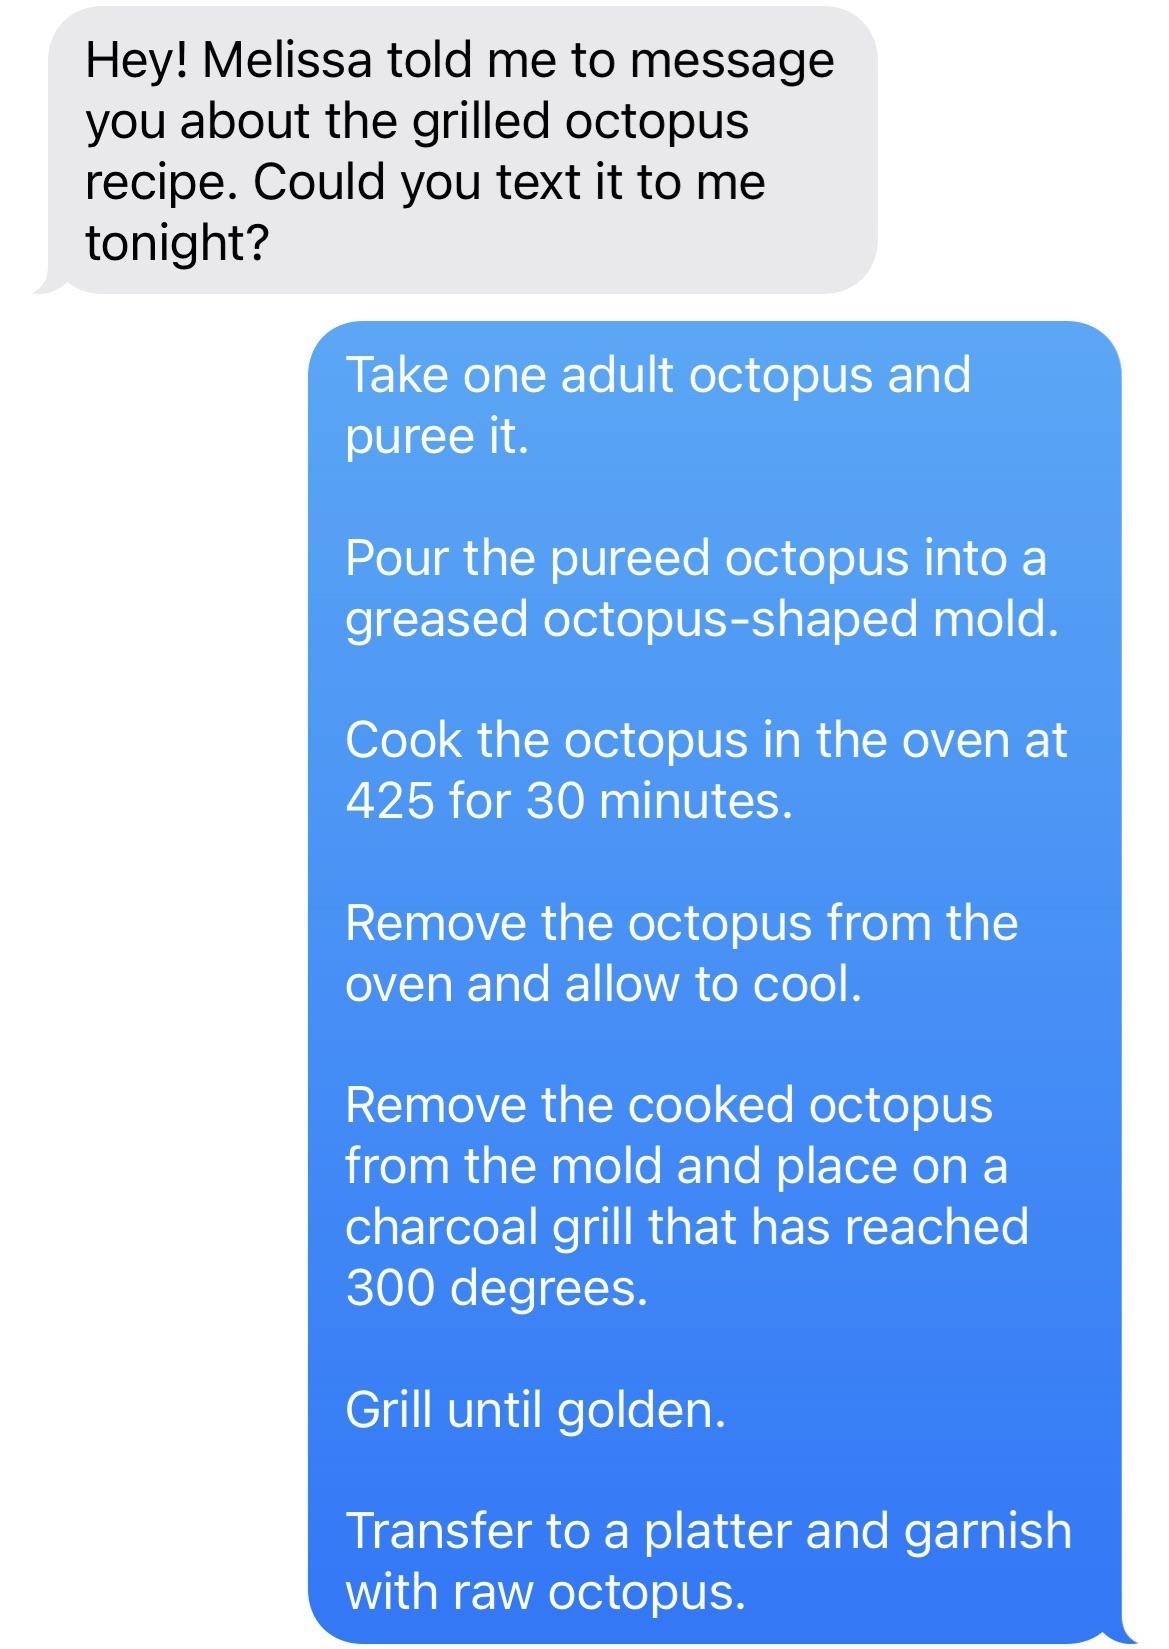 wrong number text of someone asking for an octopus recipe and the receiver gives them a ridiculous recipe